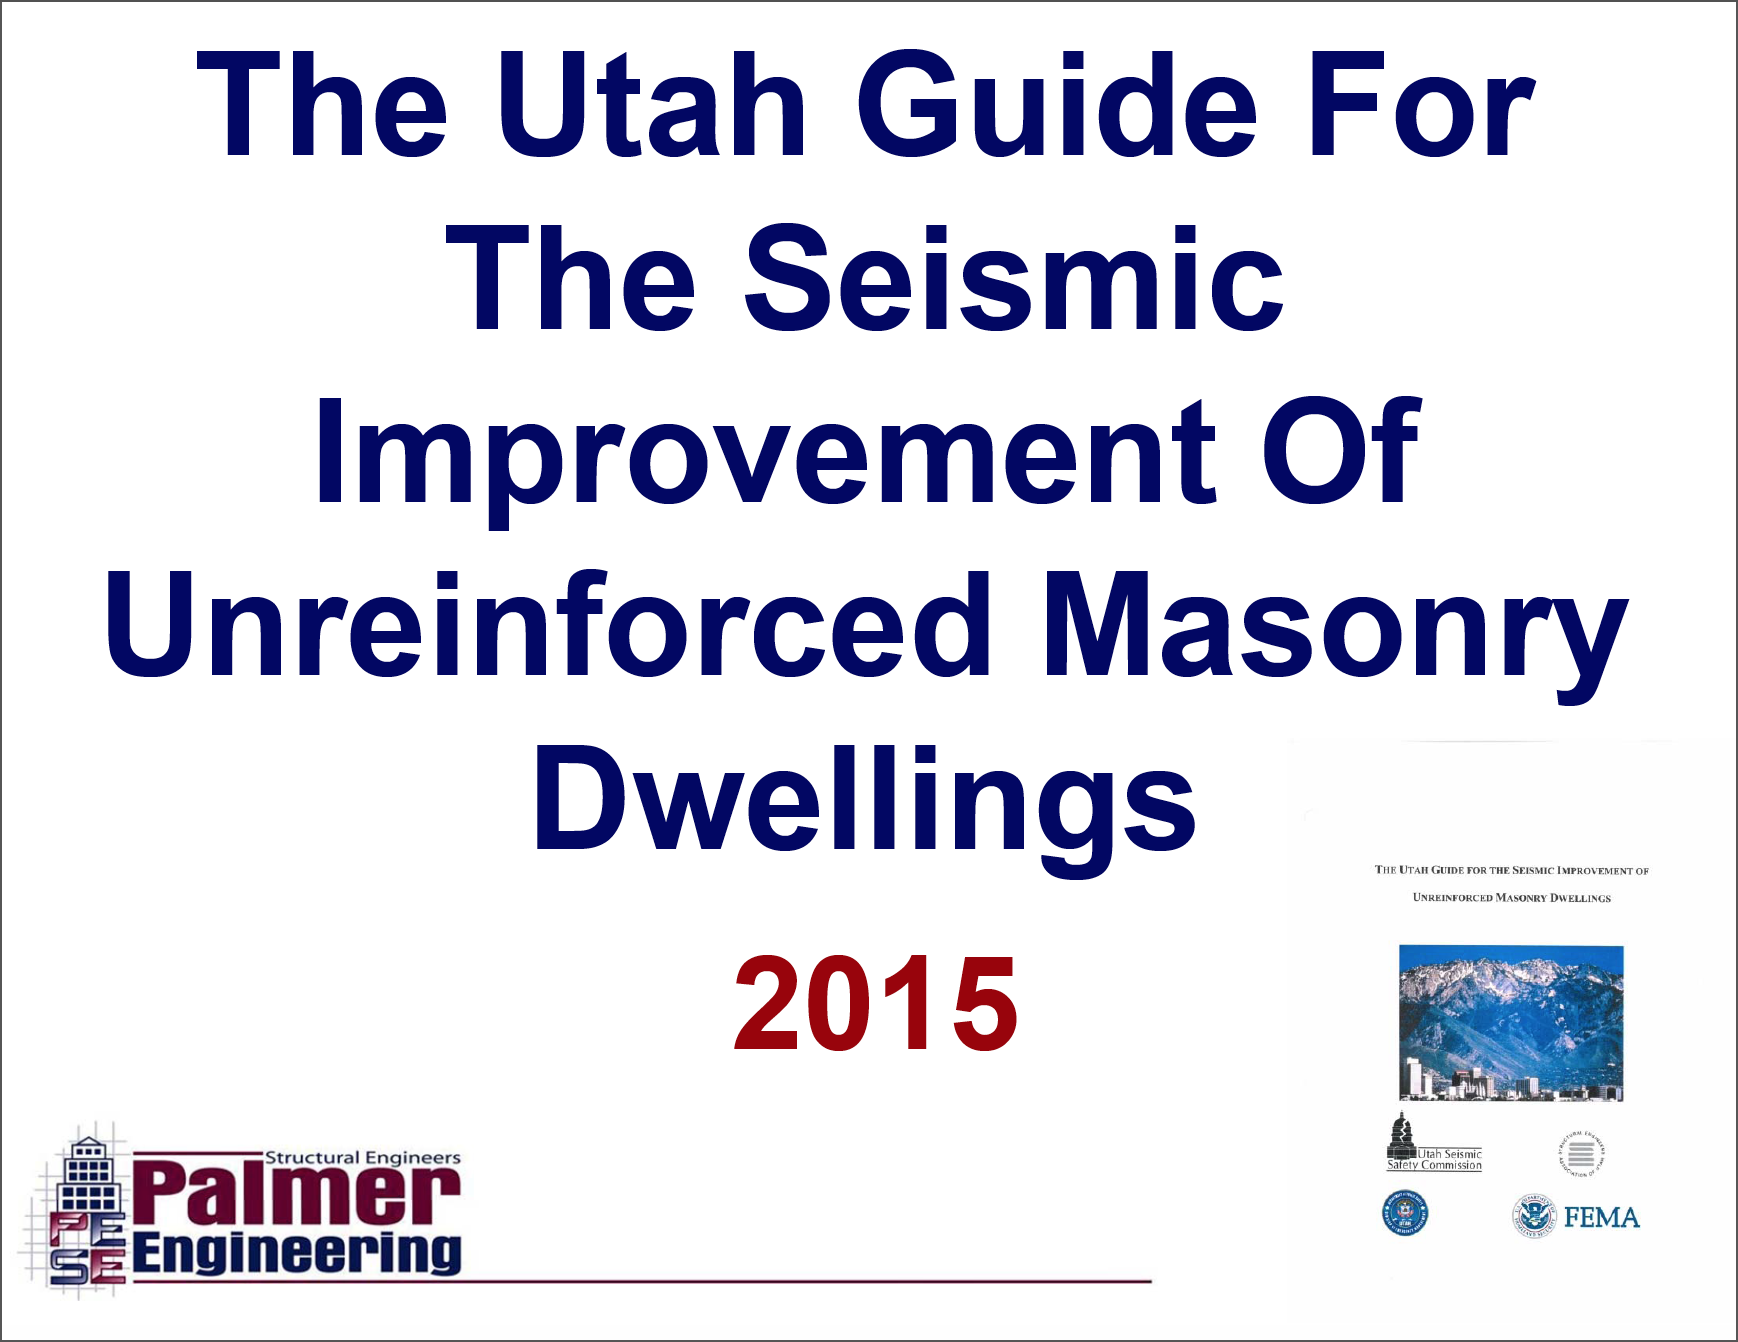 Utah Guide for the Seismic Improvement of Unreinforced Masonry Dwellings